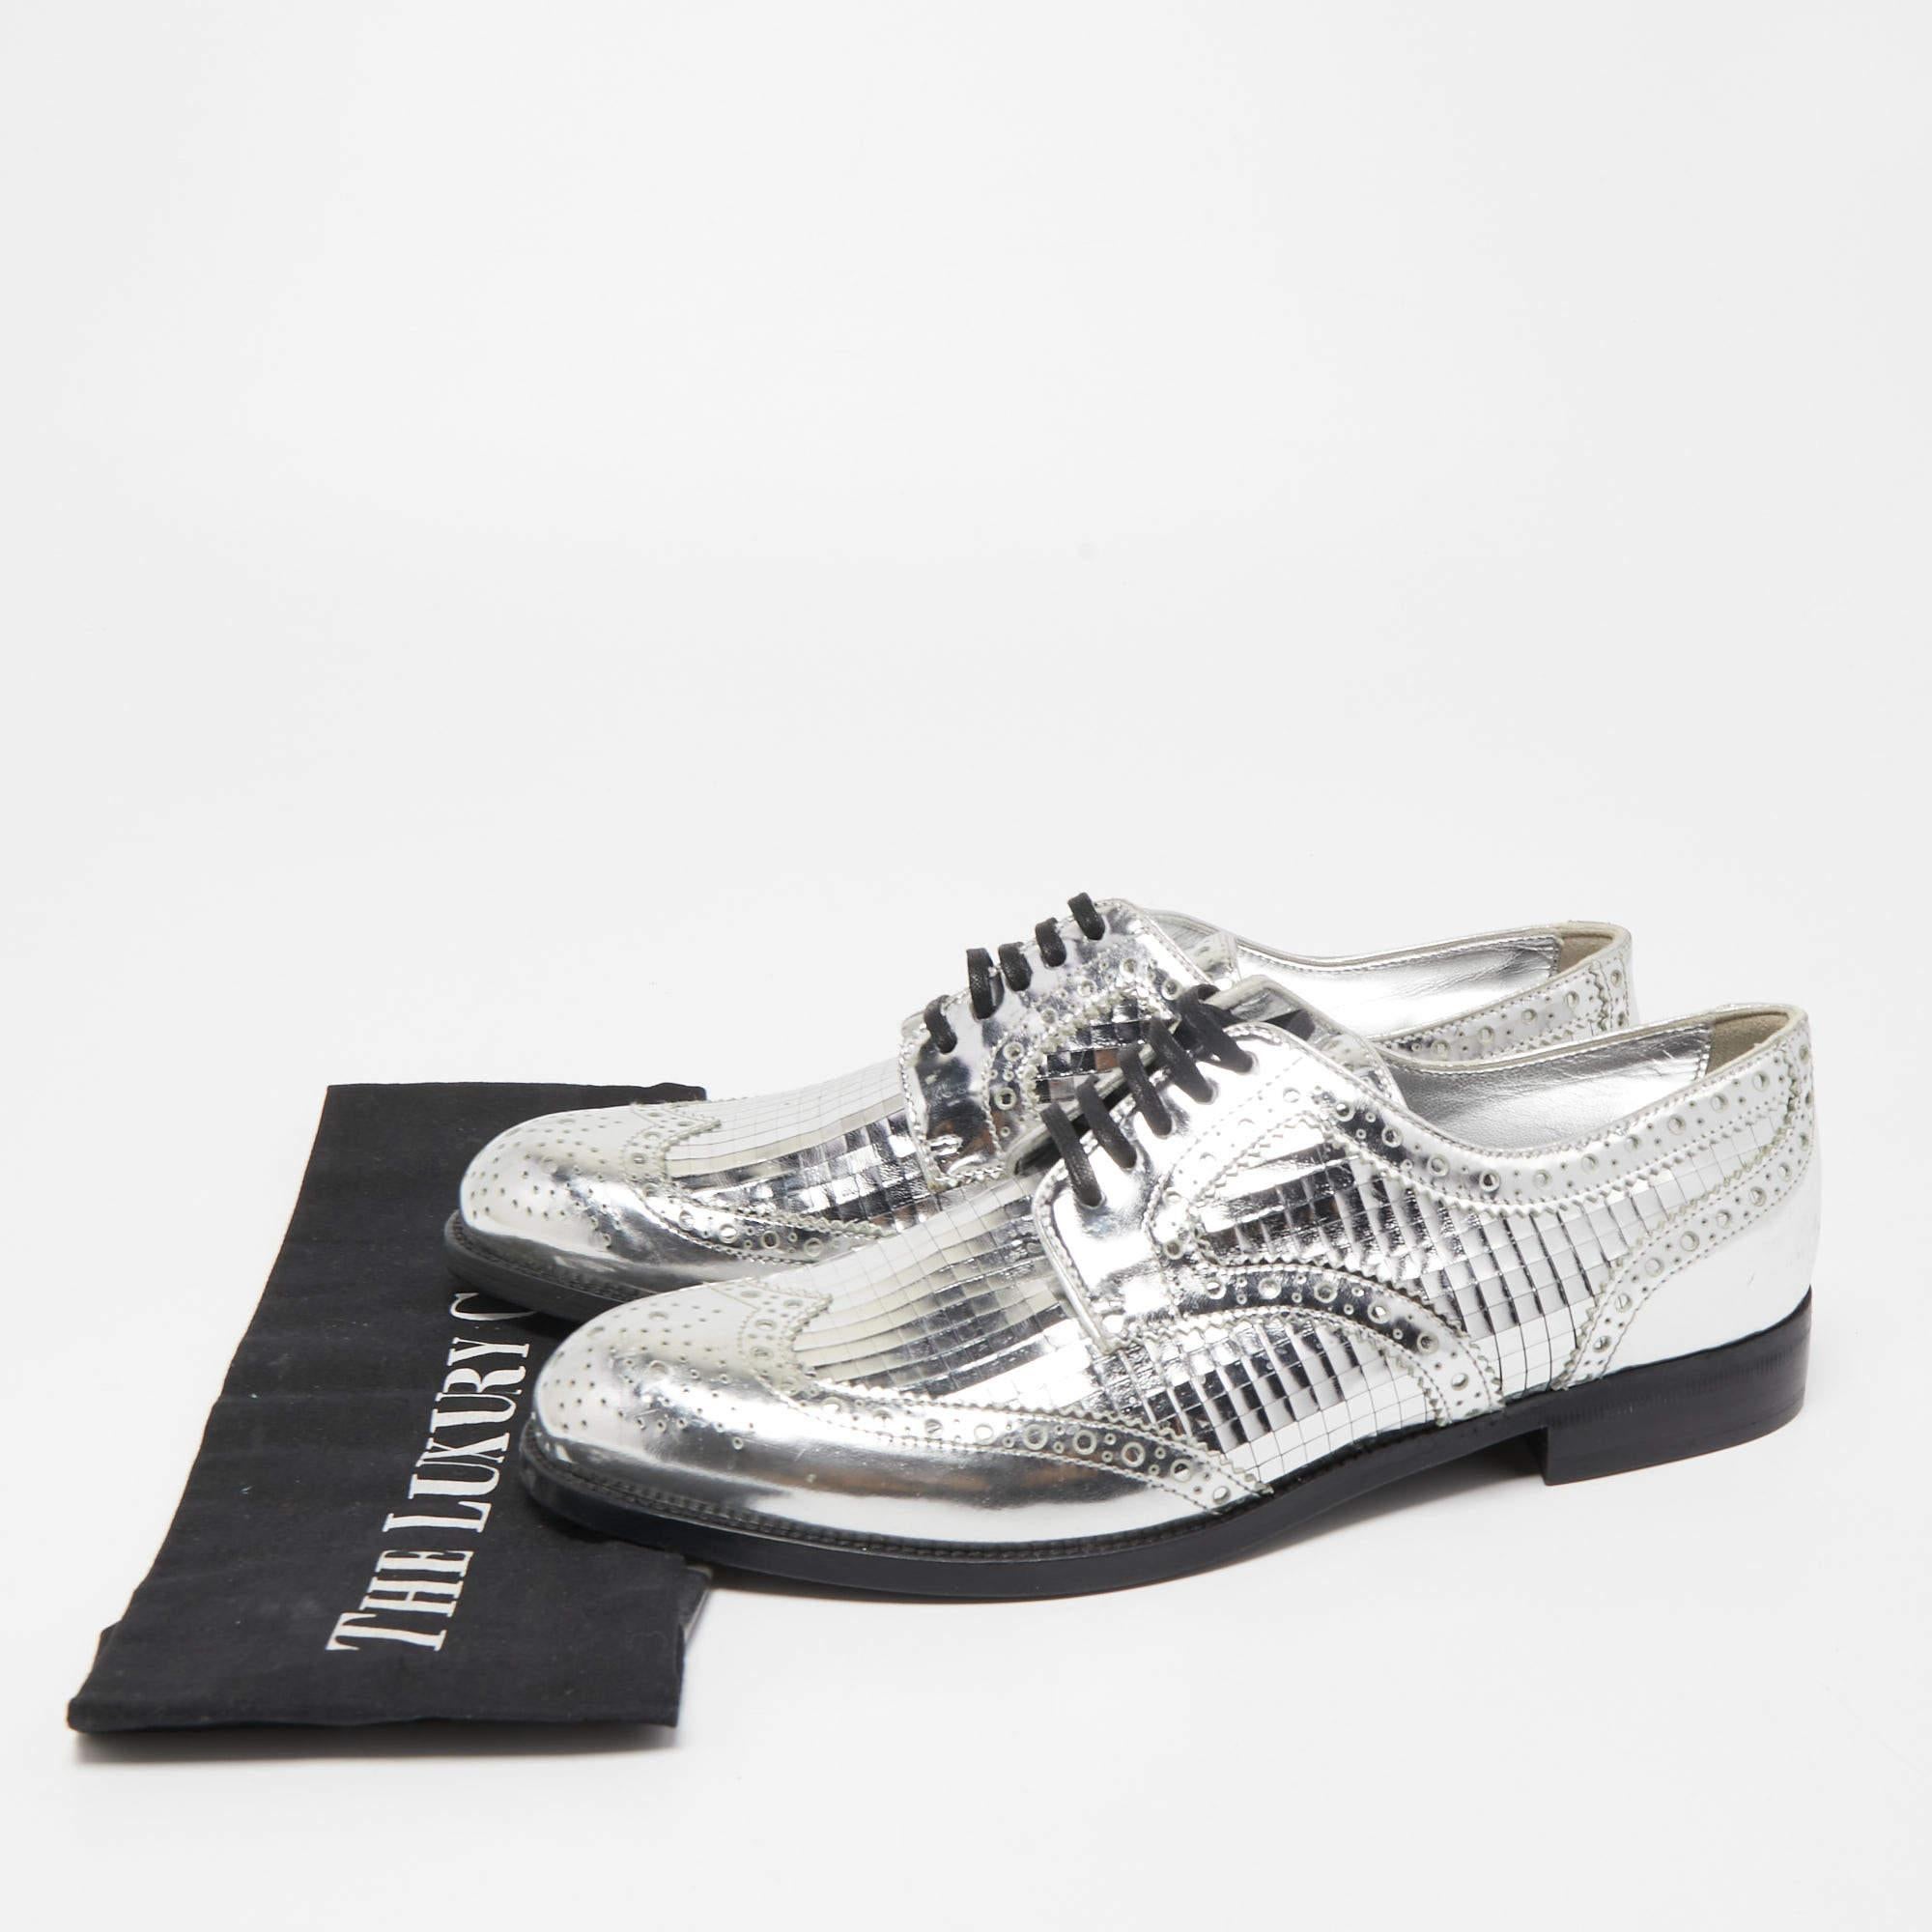 Dolce & Gabbana Silver Leather Disco Derby Brogues Size 38 5